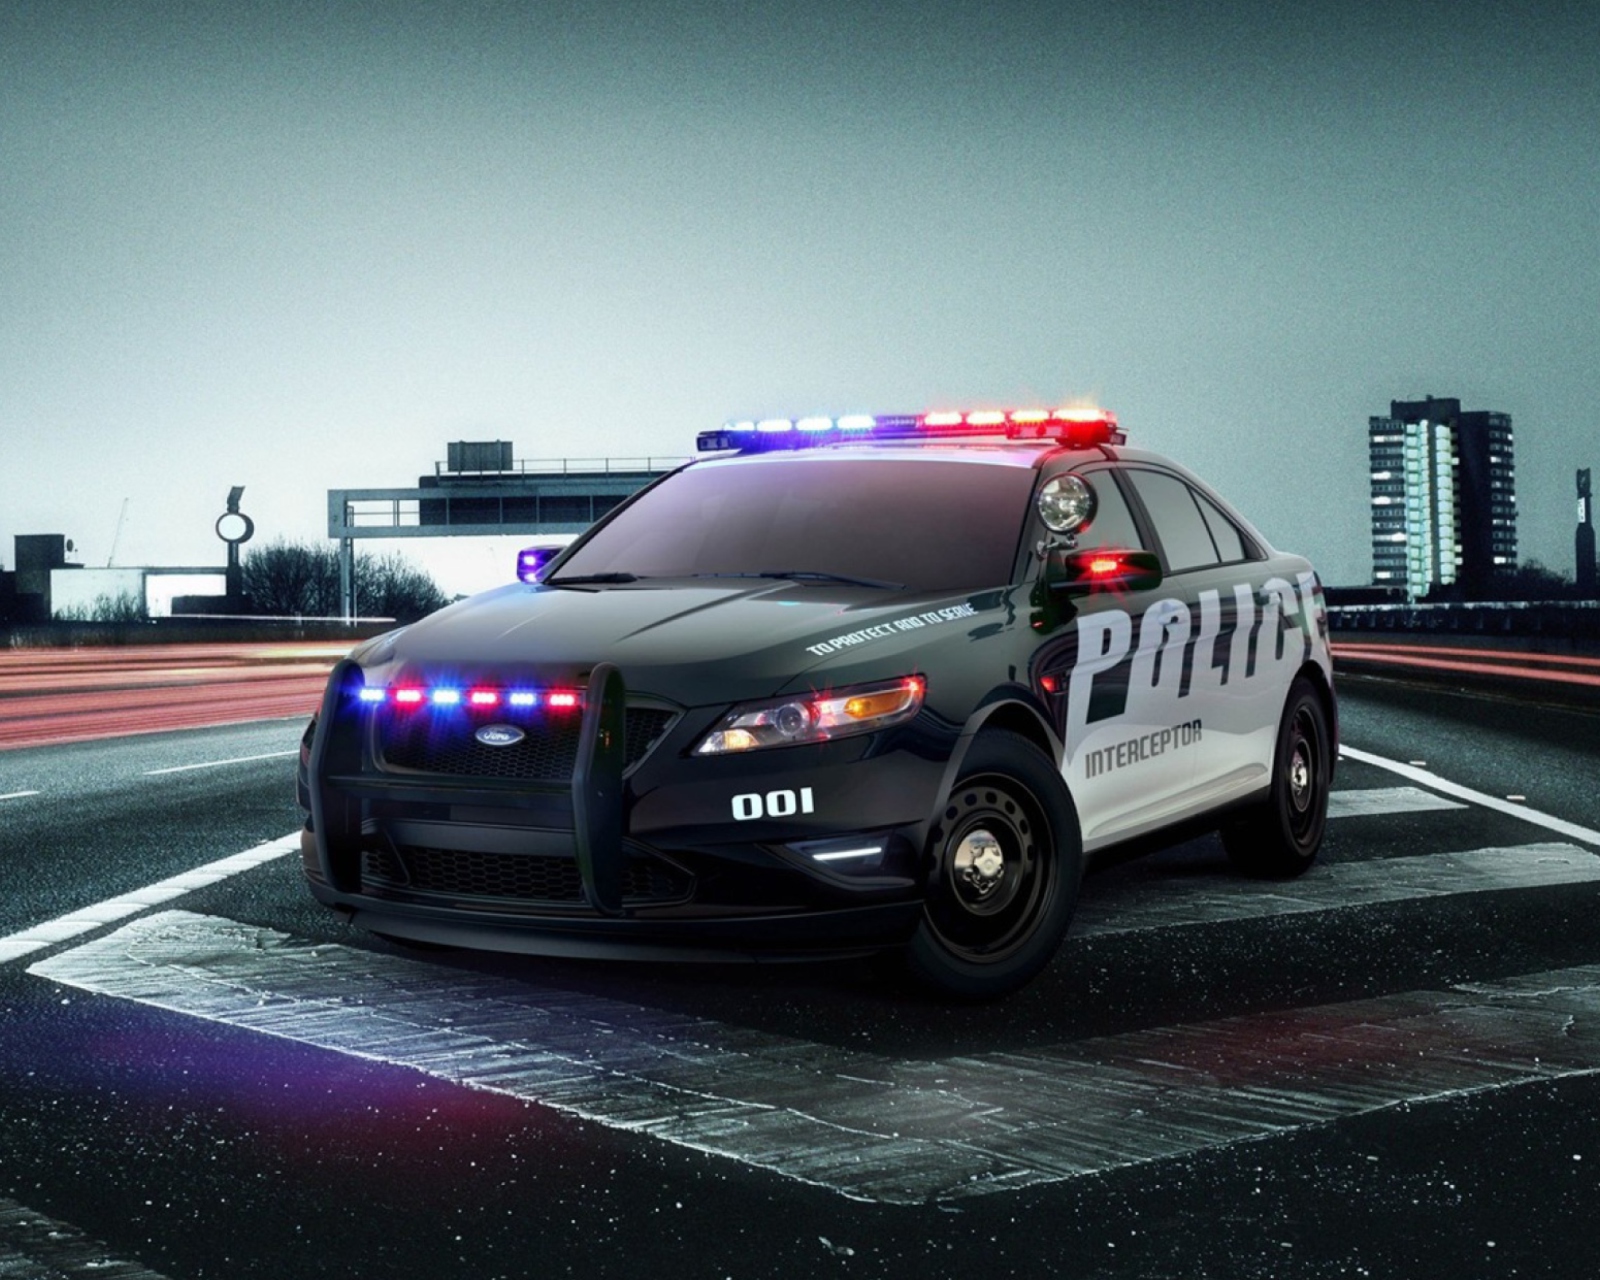 Ford Police Car wallpaper 1600x1280